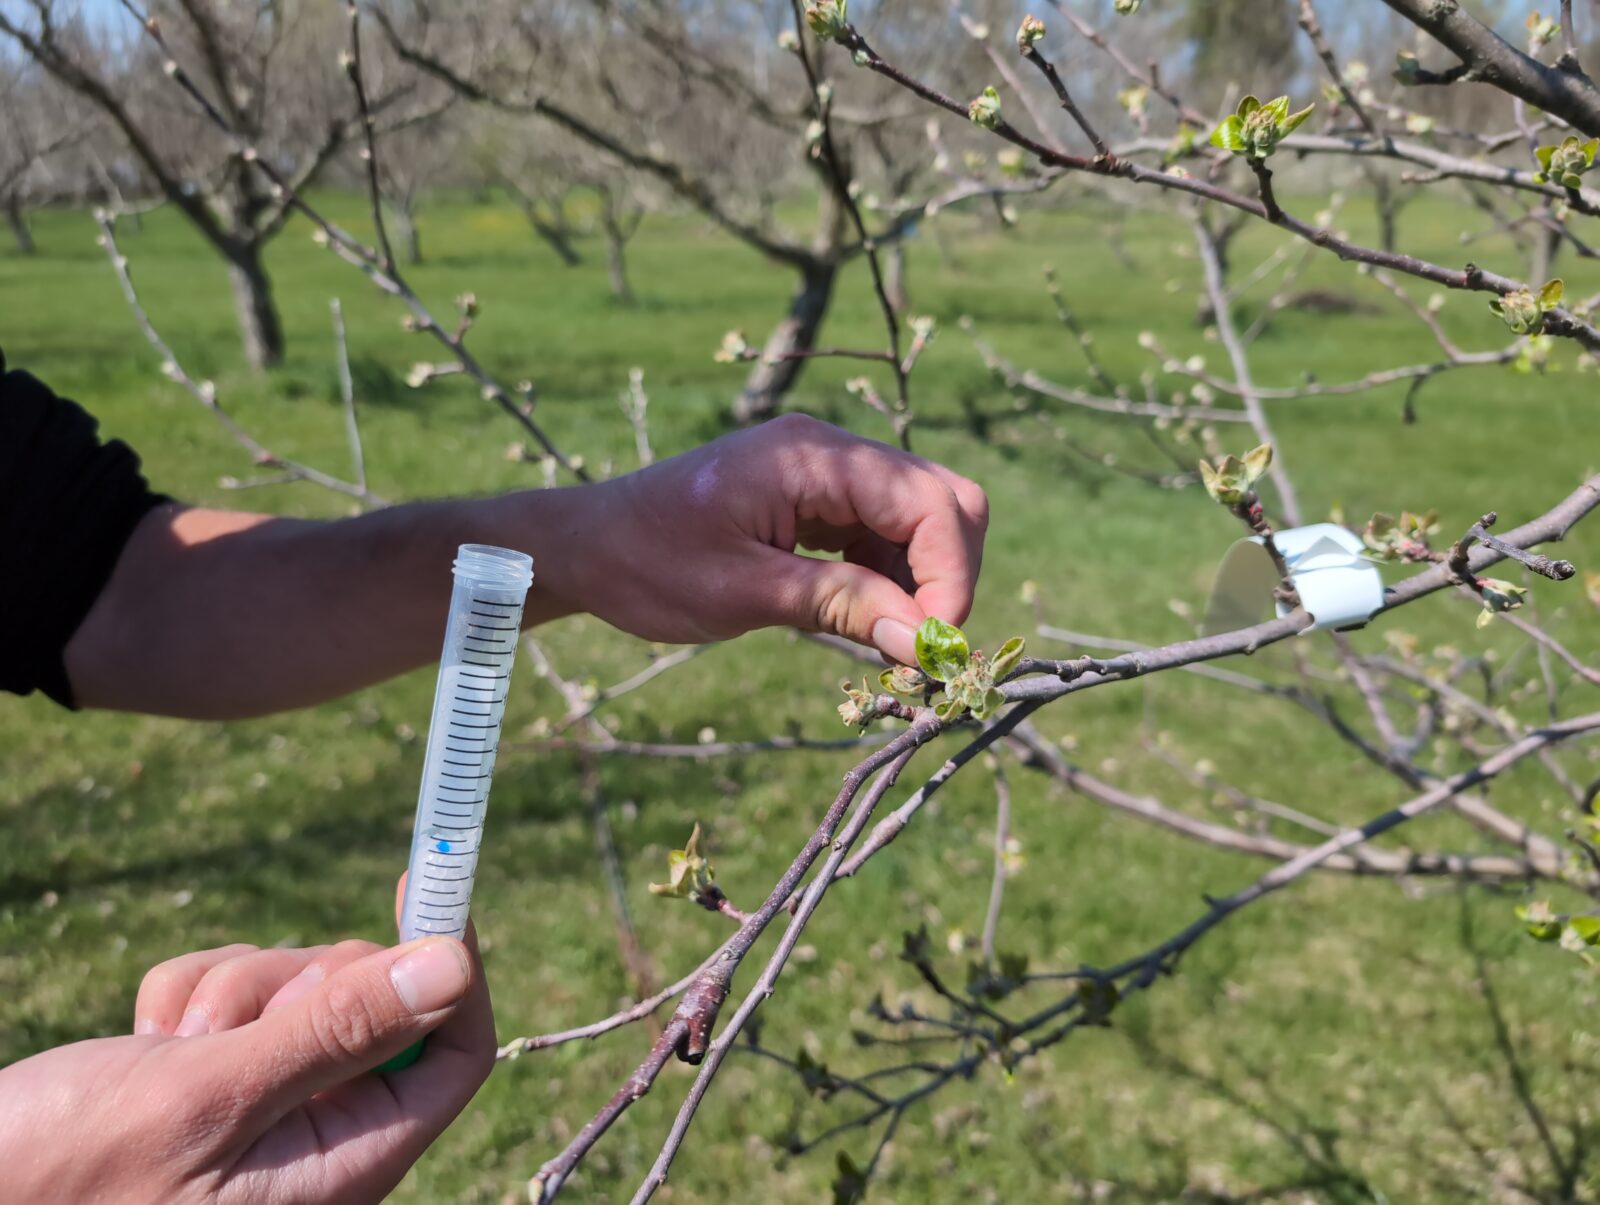 A person's hands holding a test tube and picking a small leaf off of a budding apple tree